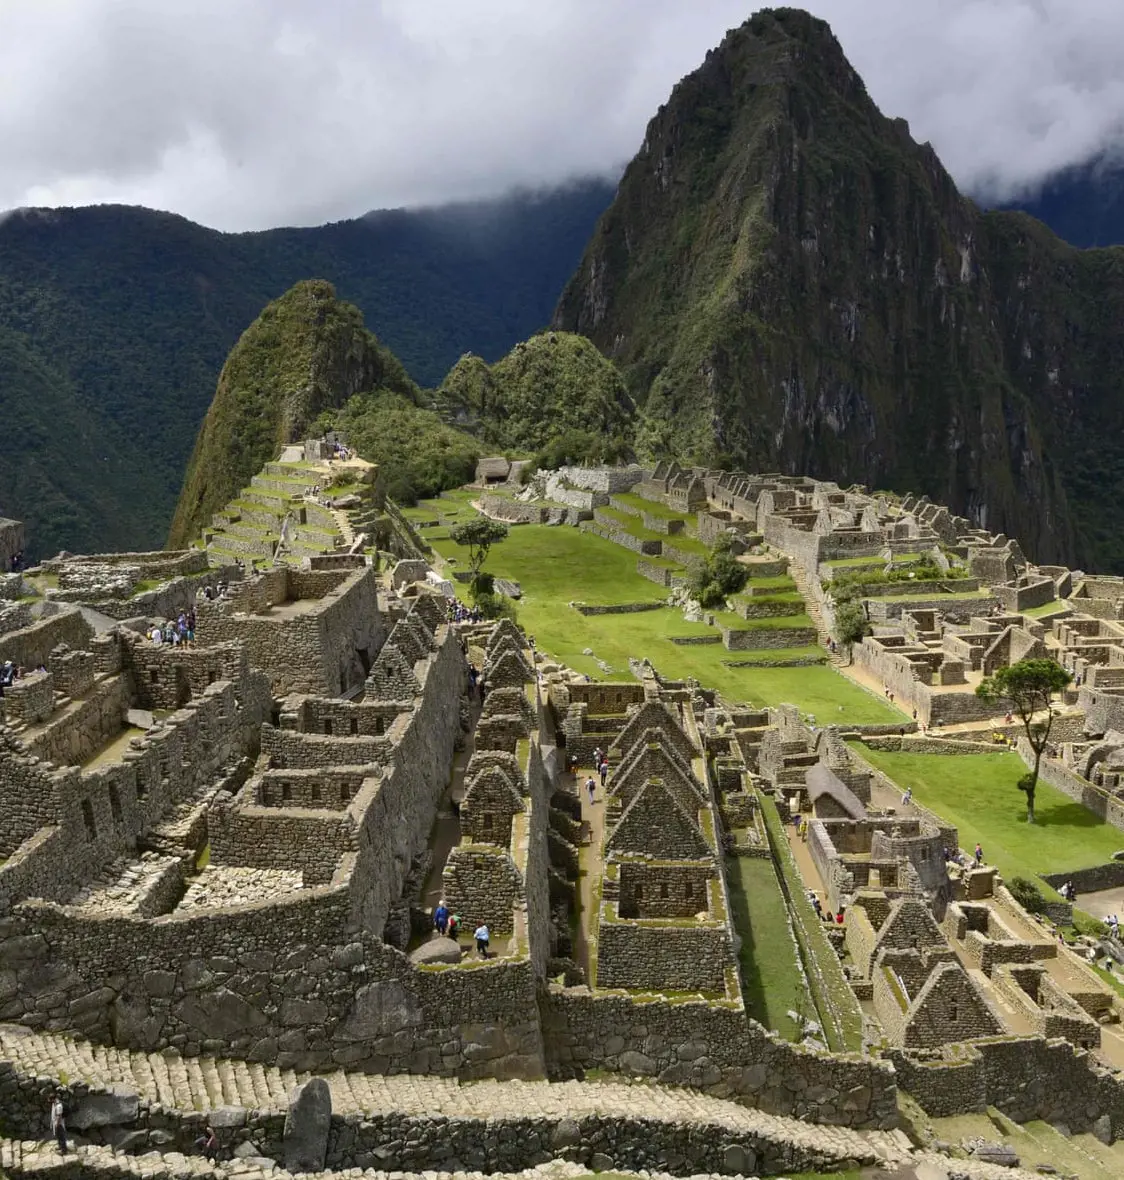 Machu Picchu has a trekking route that sees almost 2 million visitors each year